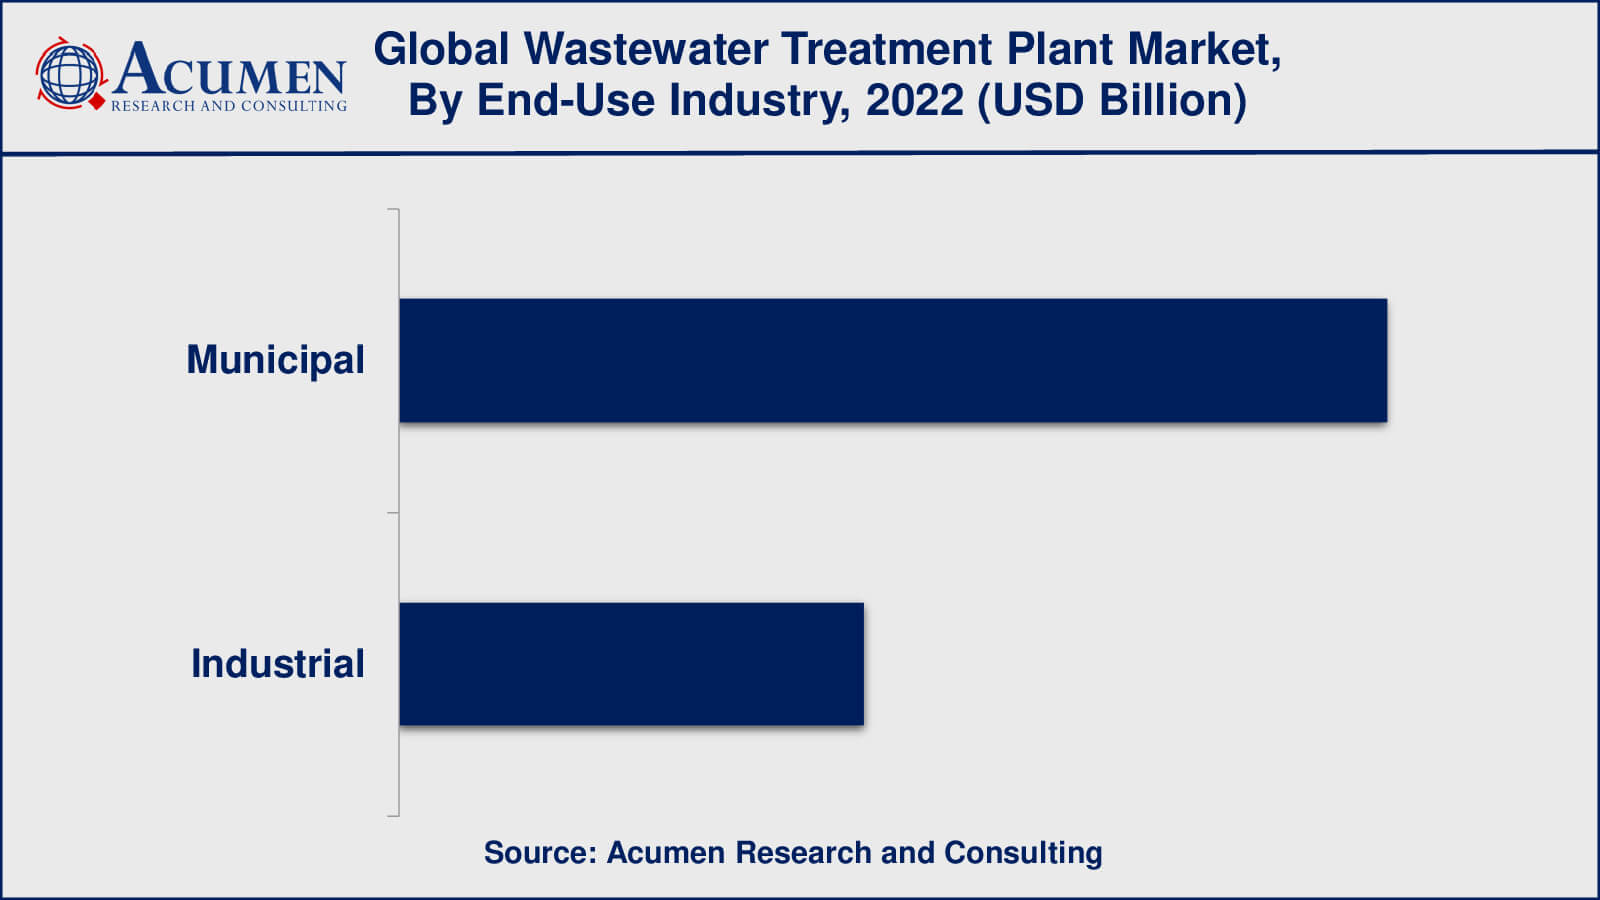 Wastewater Treatment Plant Market Drivers